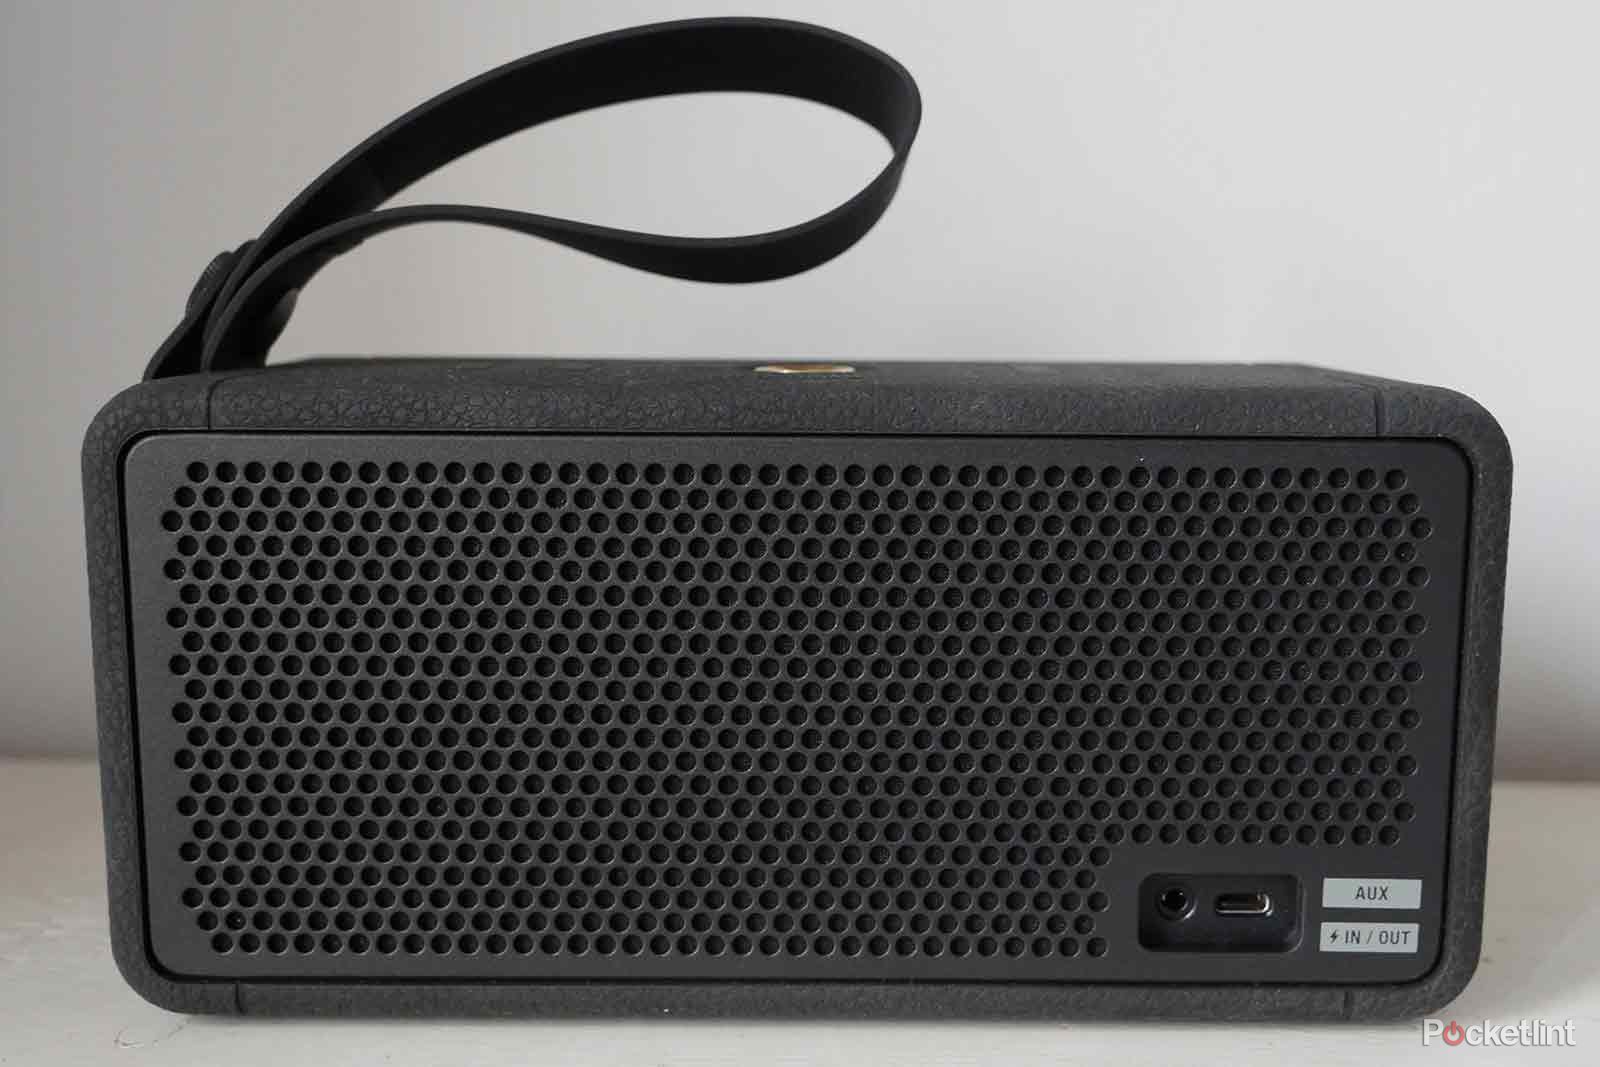 Marshall Middleton review: punchy, portable sound